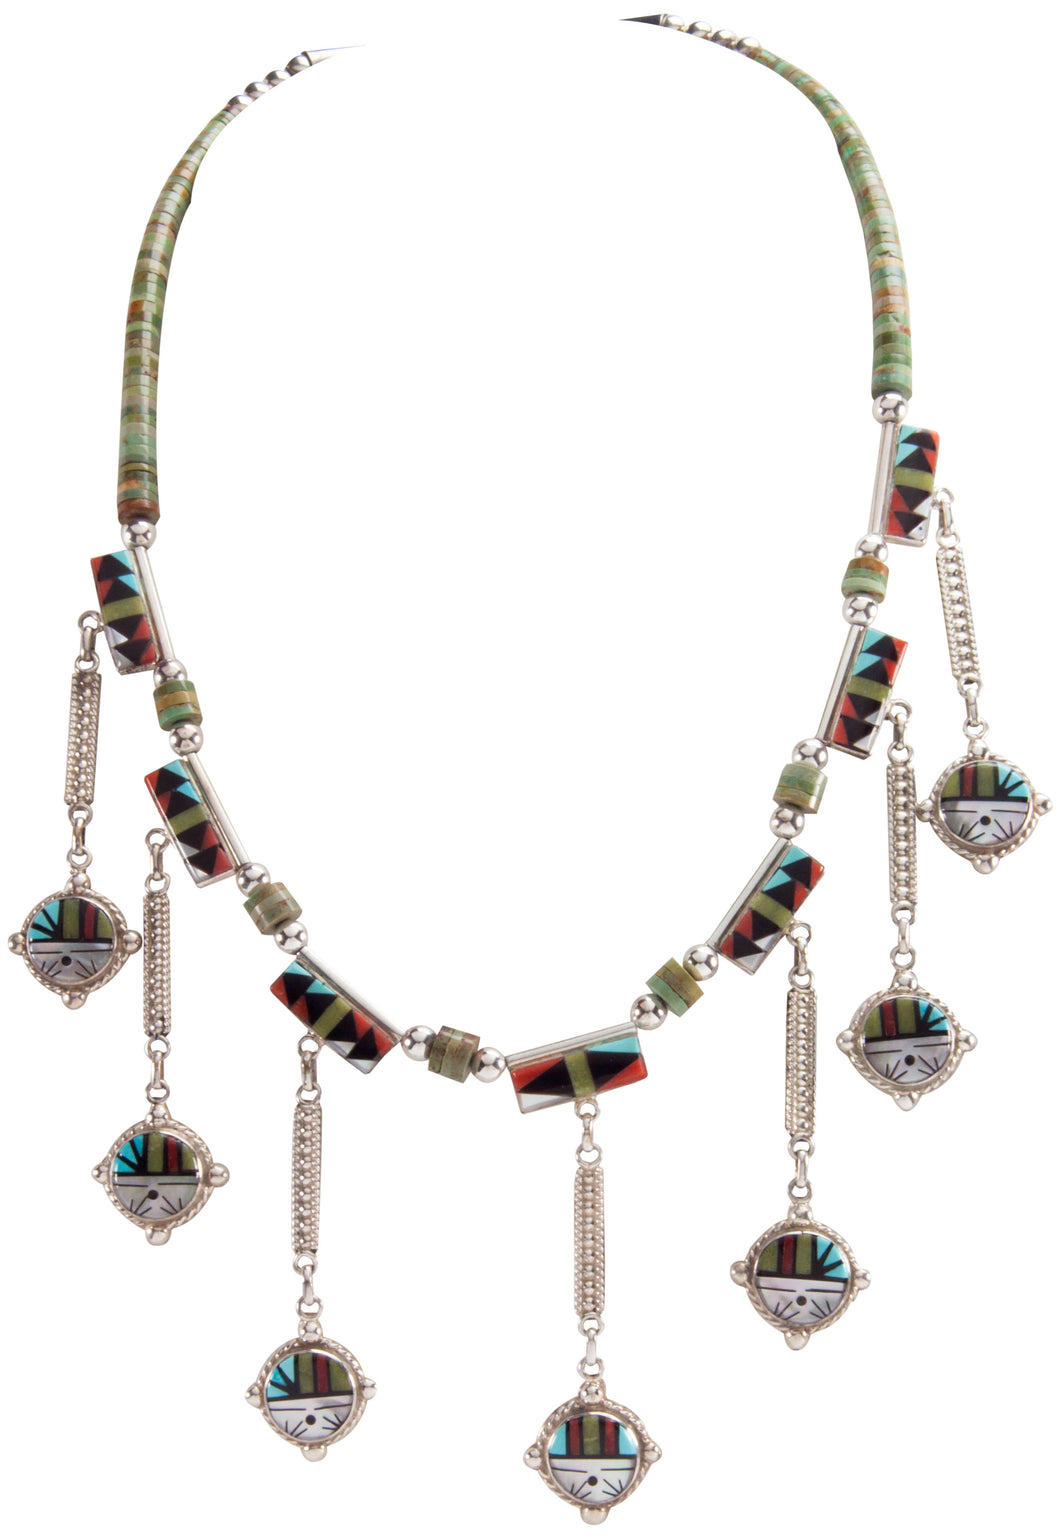 Zuni Native American Turquoise Sunface Necklace by Sheryl Edaakie SKU228998